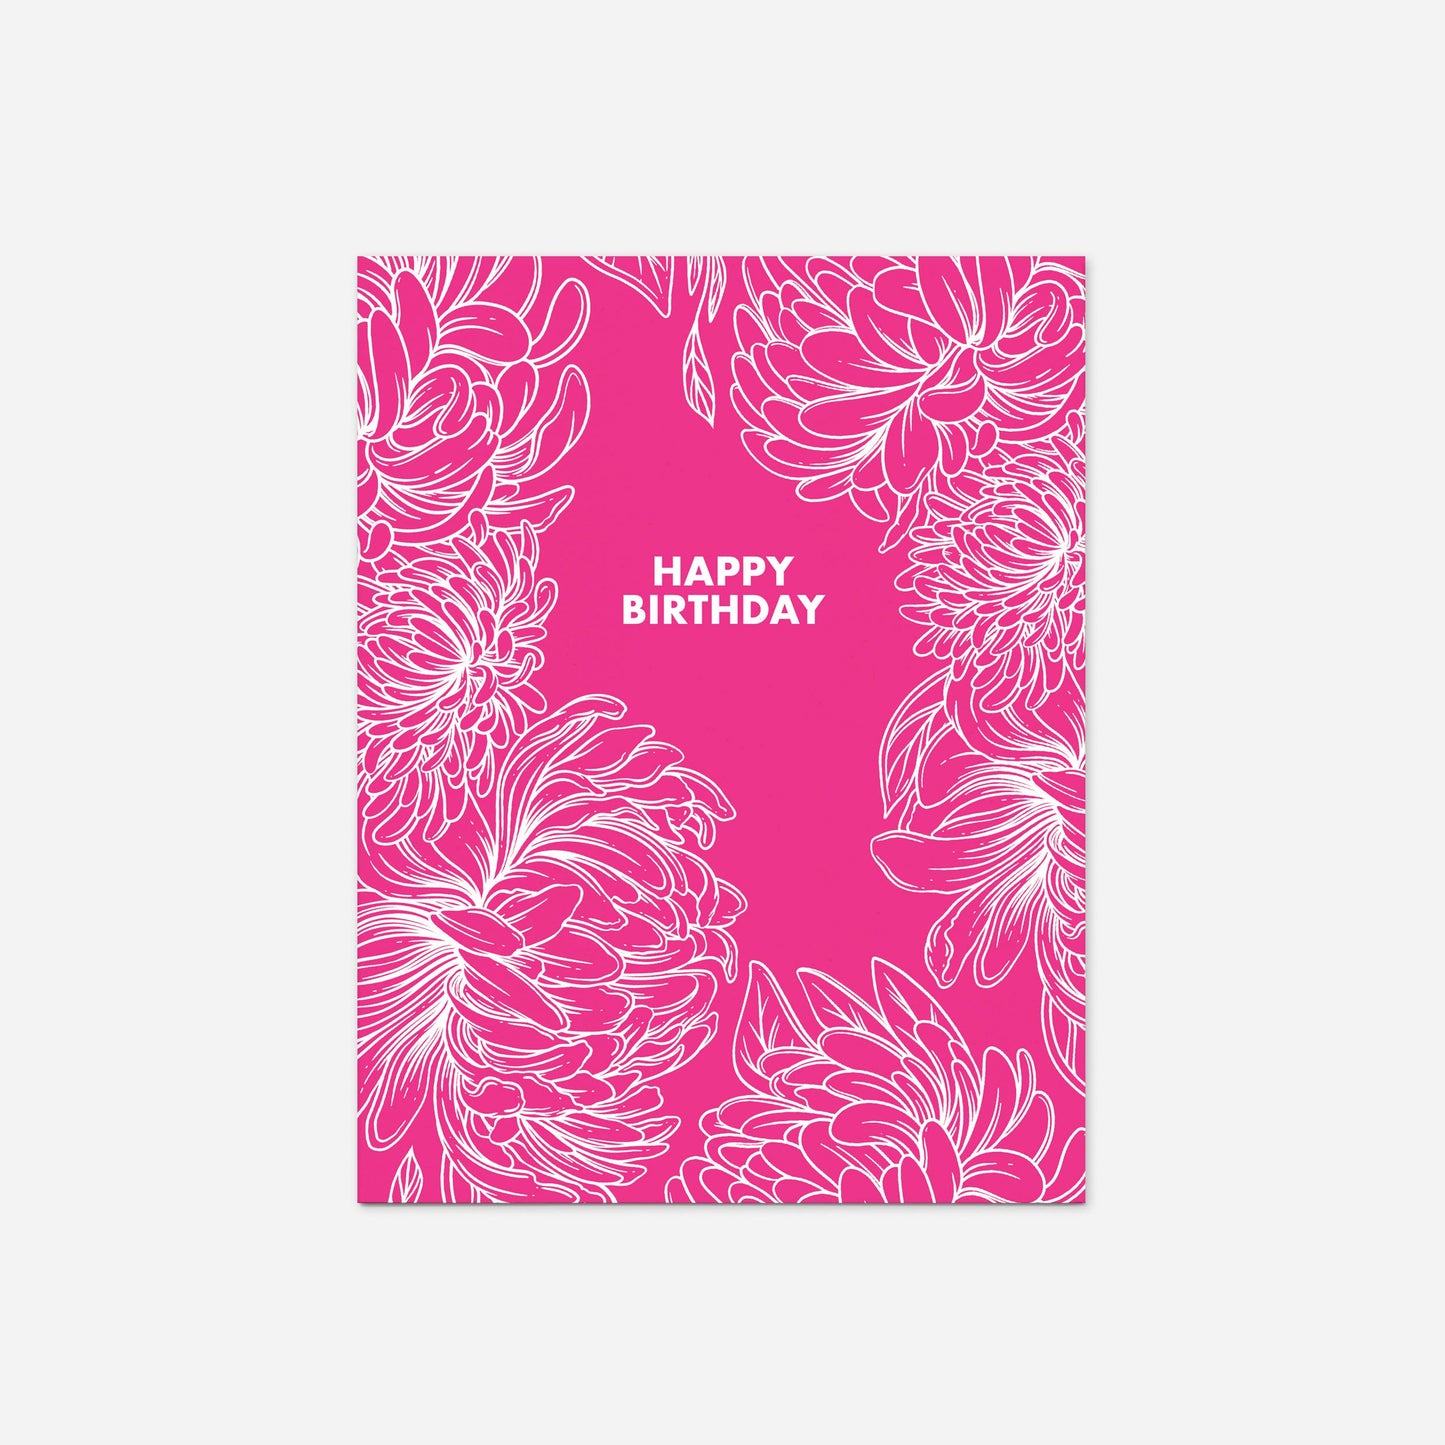 Set of 8 of "Pink Flowers" Birthday Greeting Cards